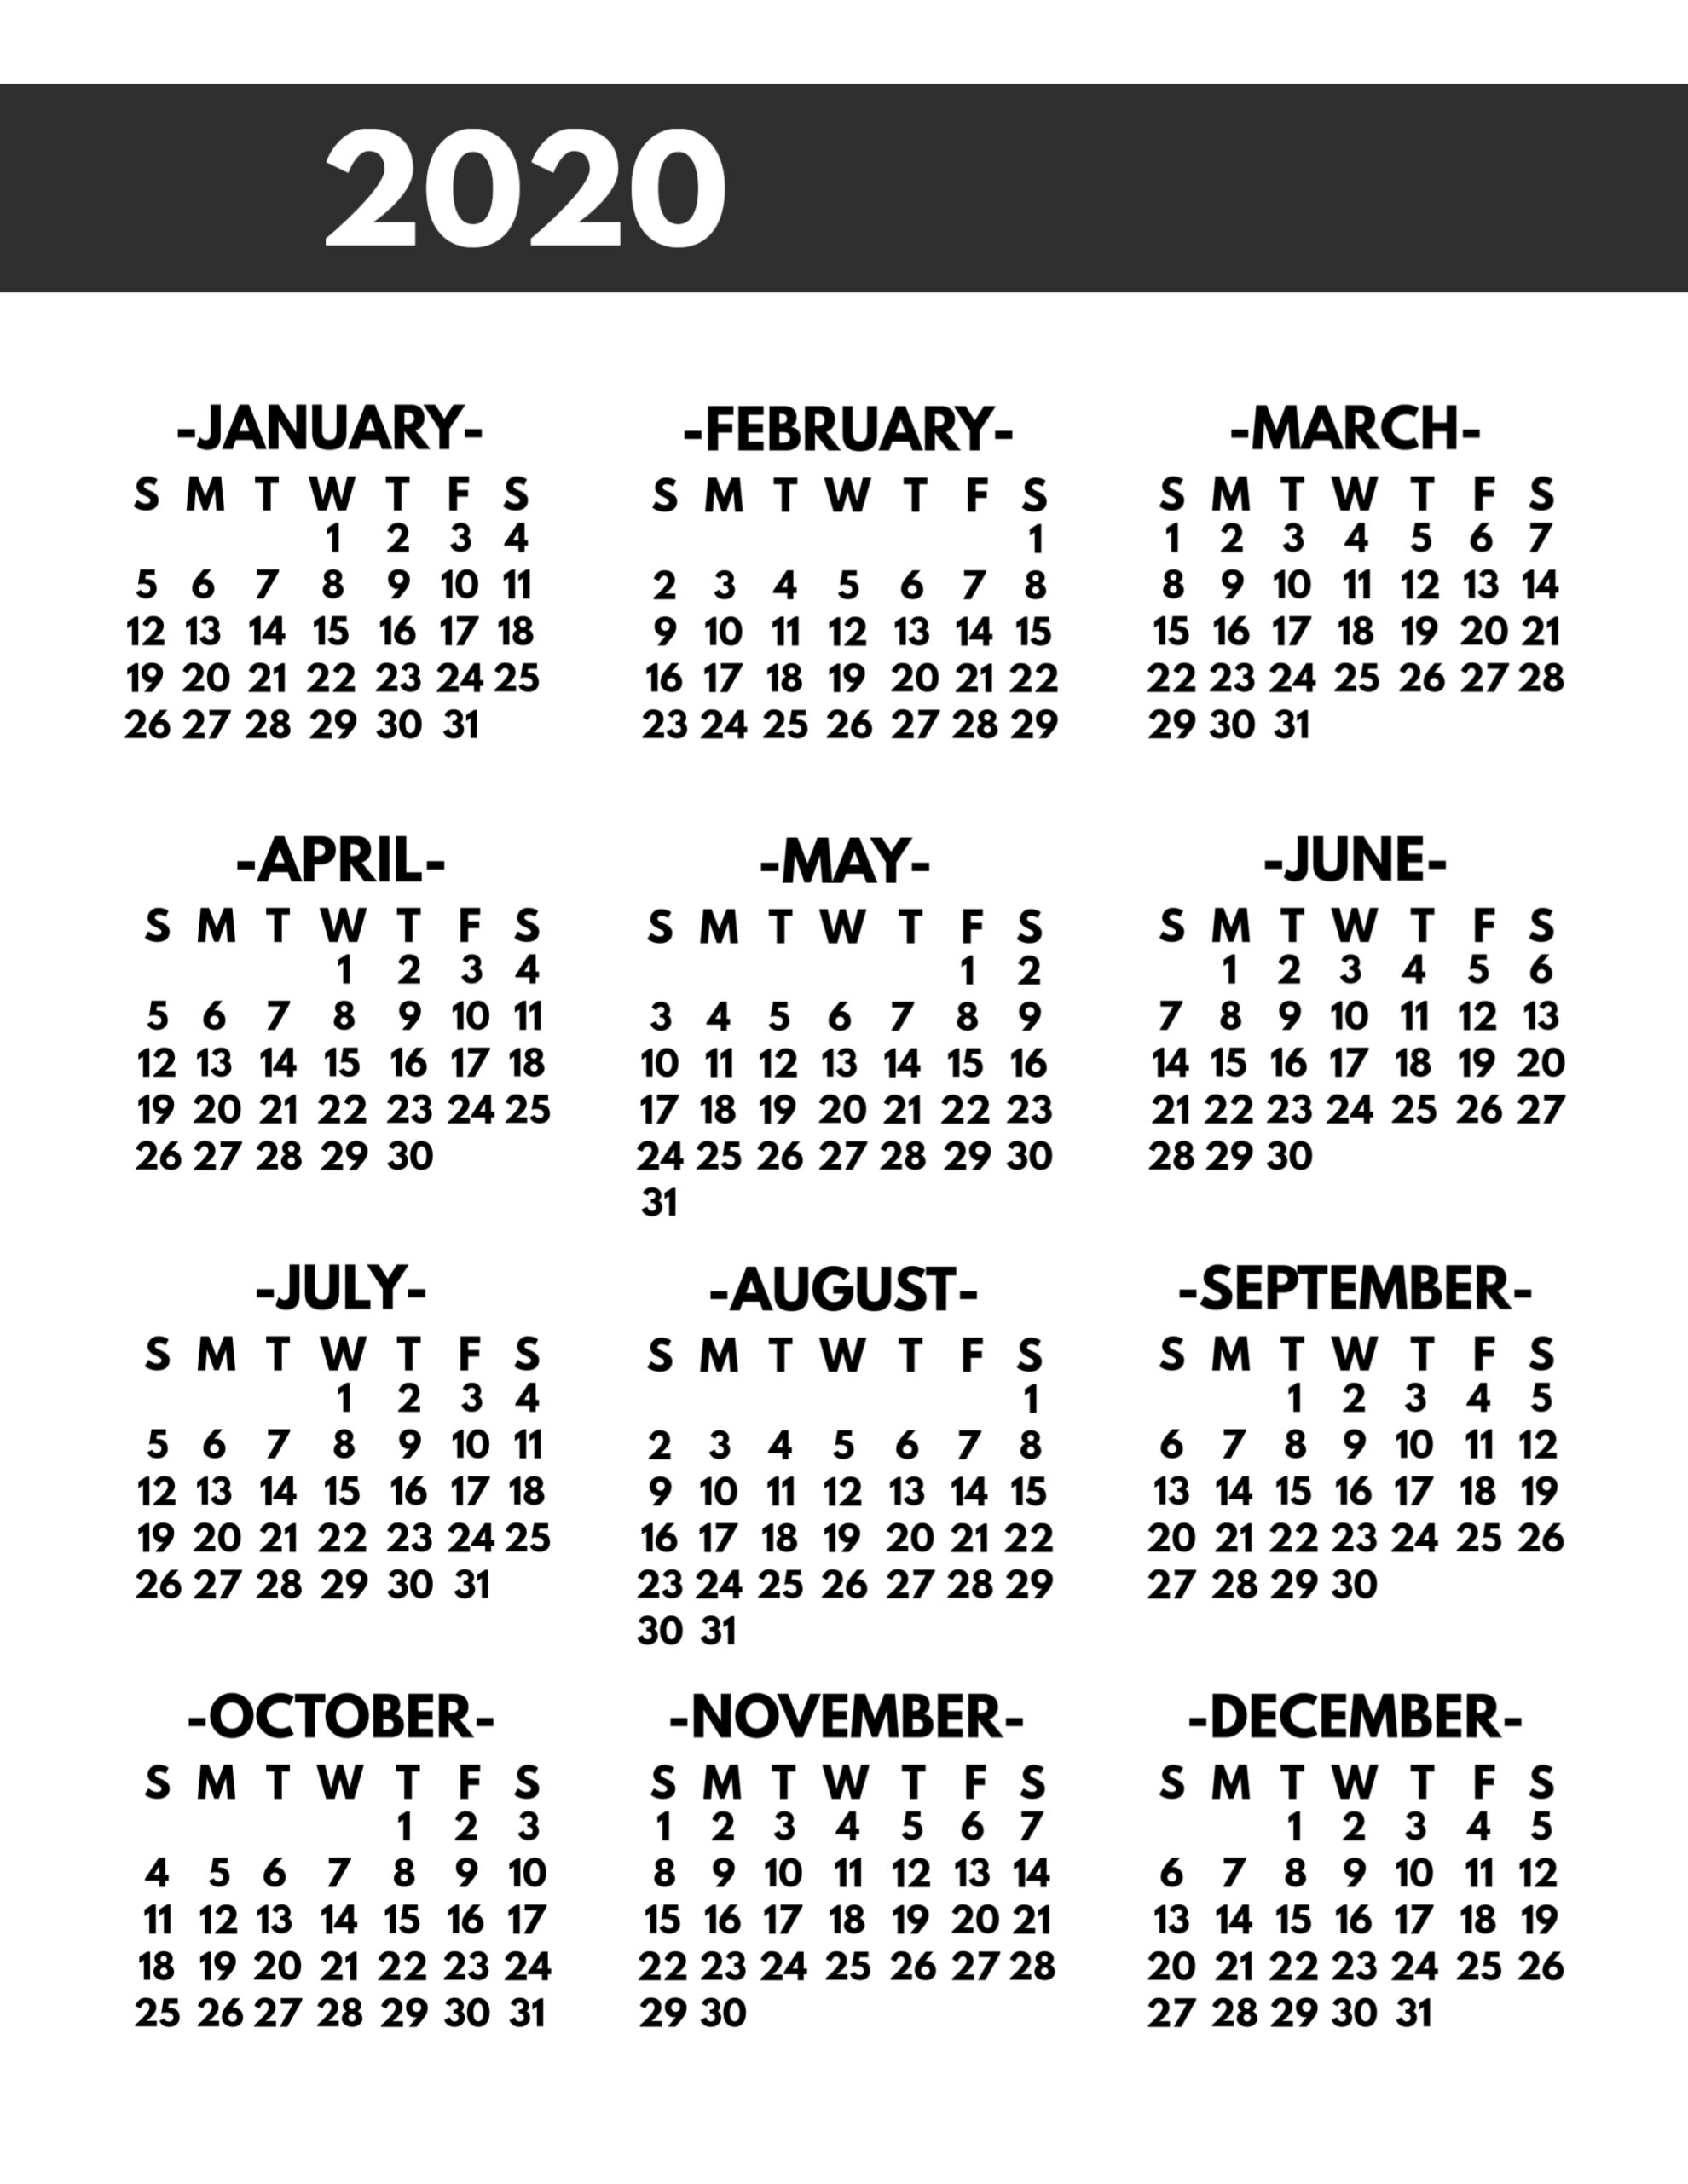 2020 Calendar Year At A Glance  Yatay.horizonconsulting.co with 2020 At A Glance Calendar Printable